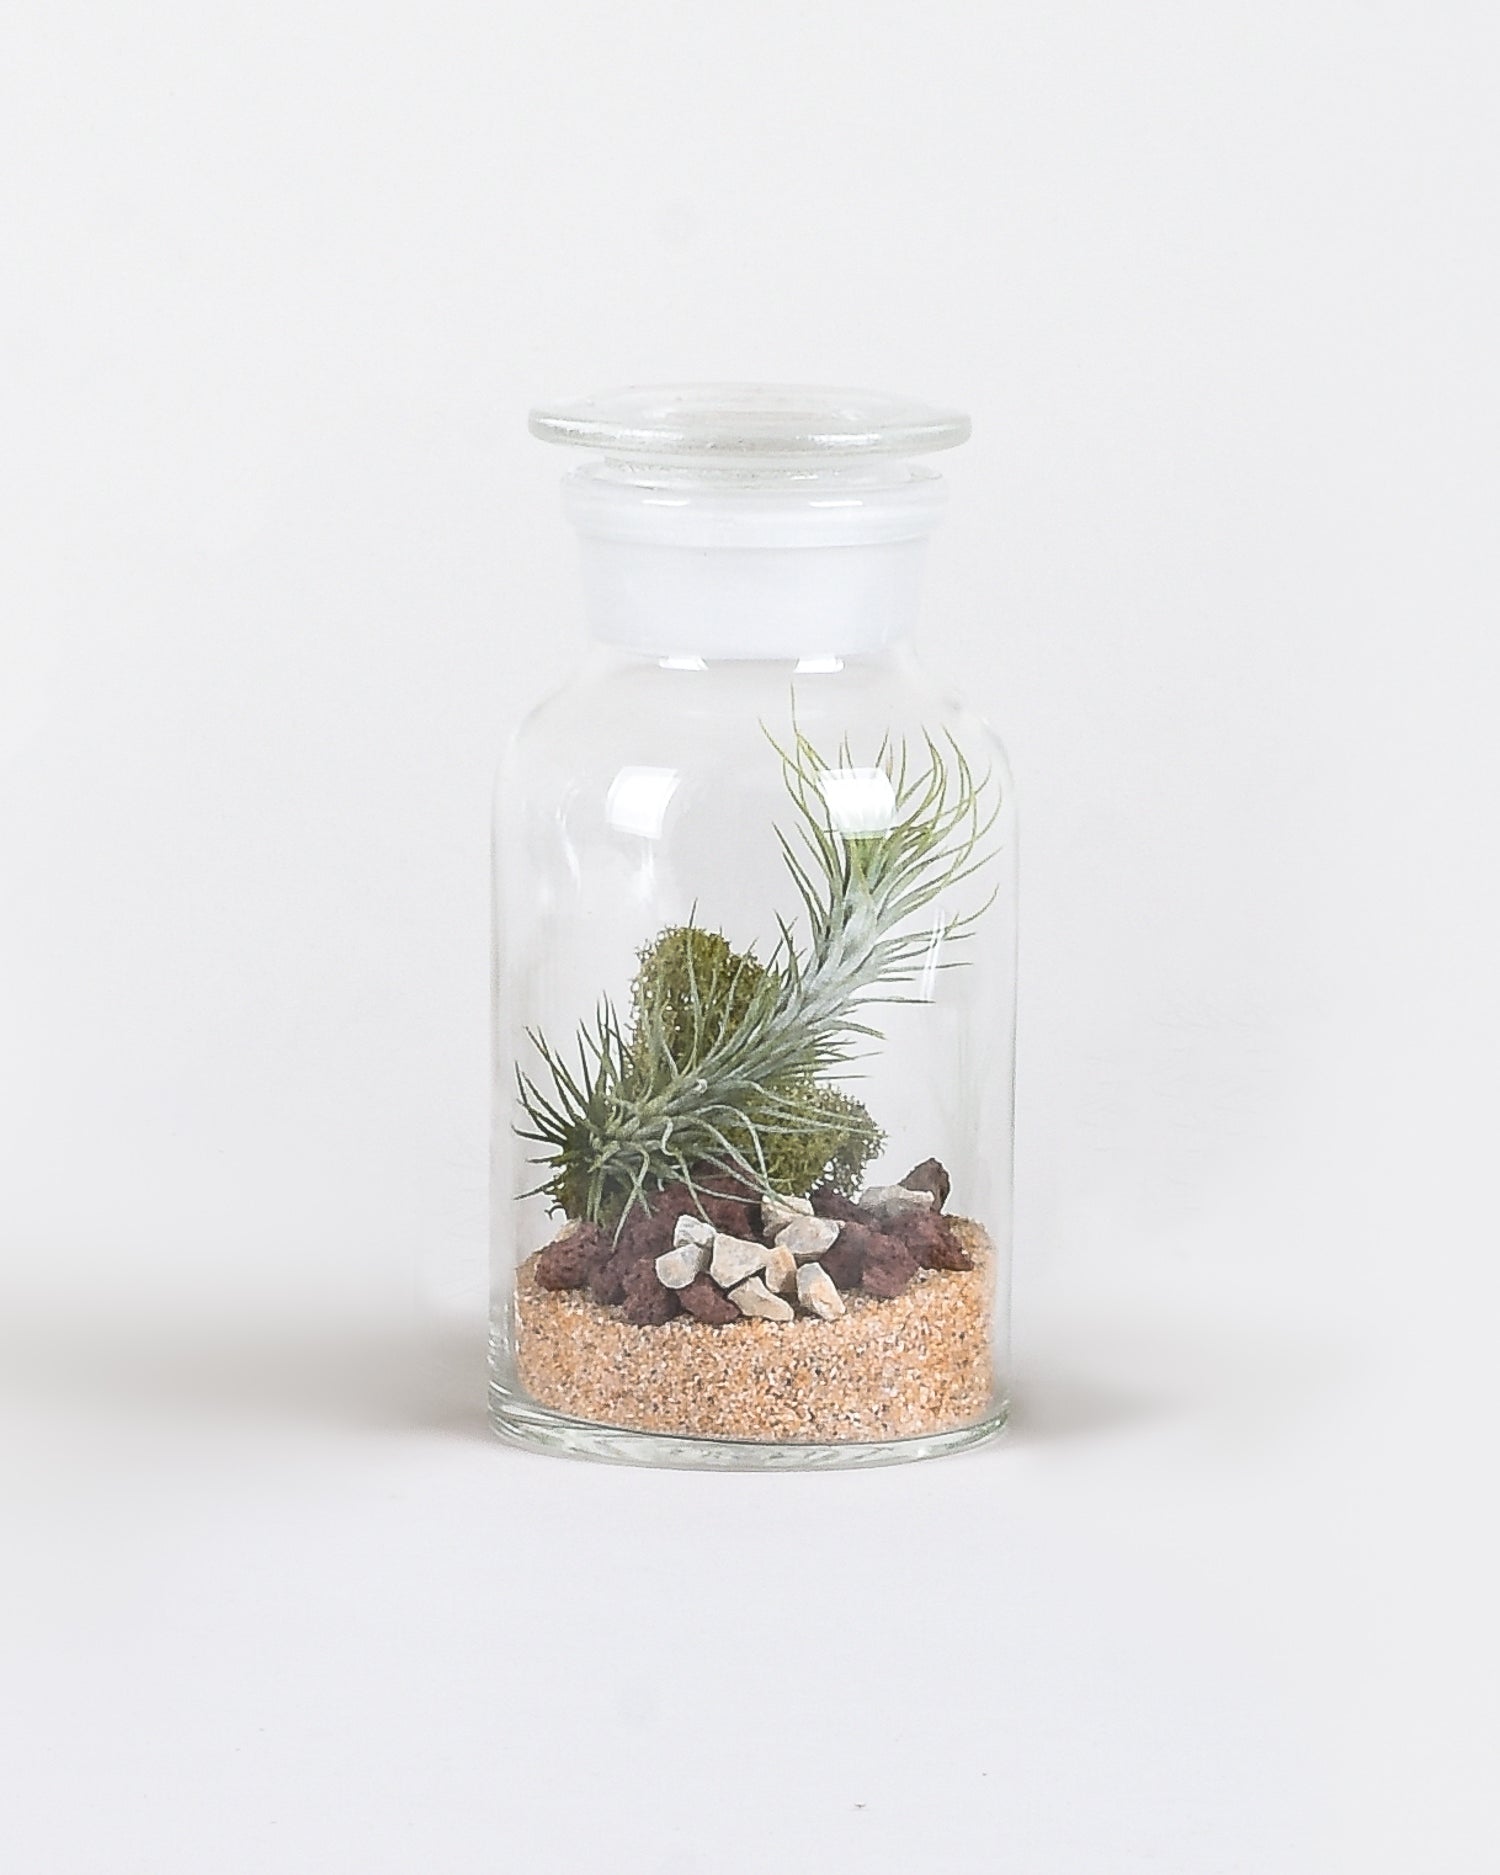 Apothecary aerium containing tan colored sand, green moss, and light green long and skinny air plant